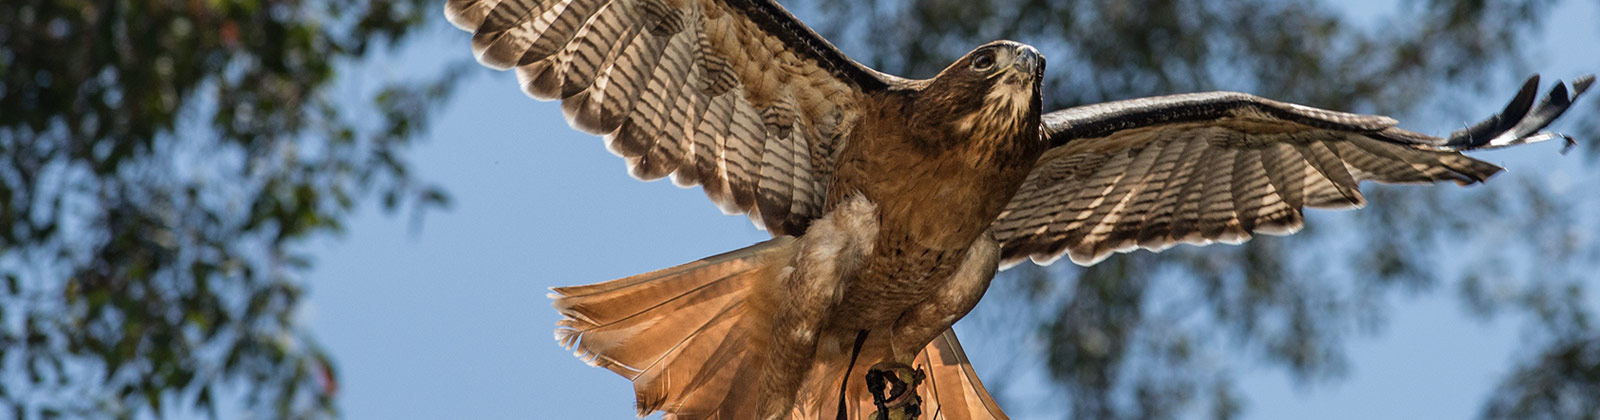 Red-Tailed Hawk - Los Angeles Zoo and Botanical Gardens (LA Zoo)